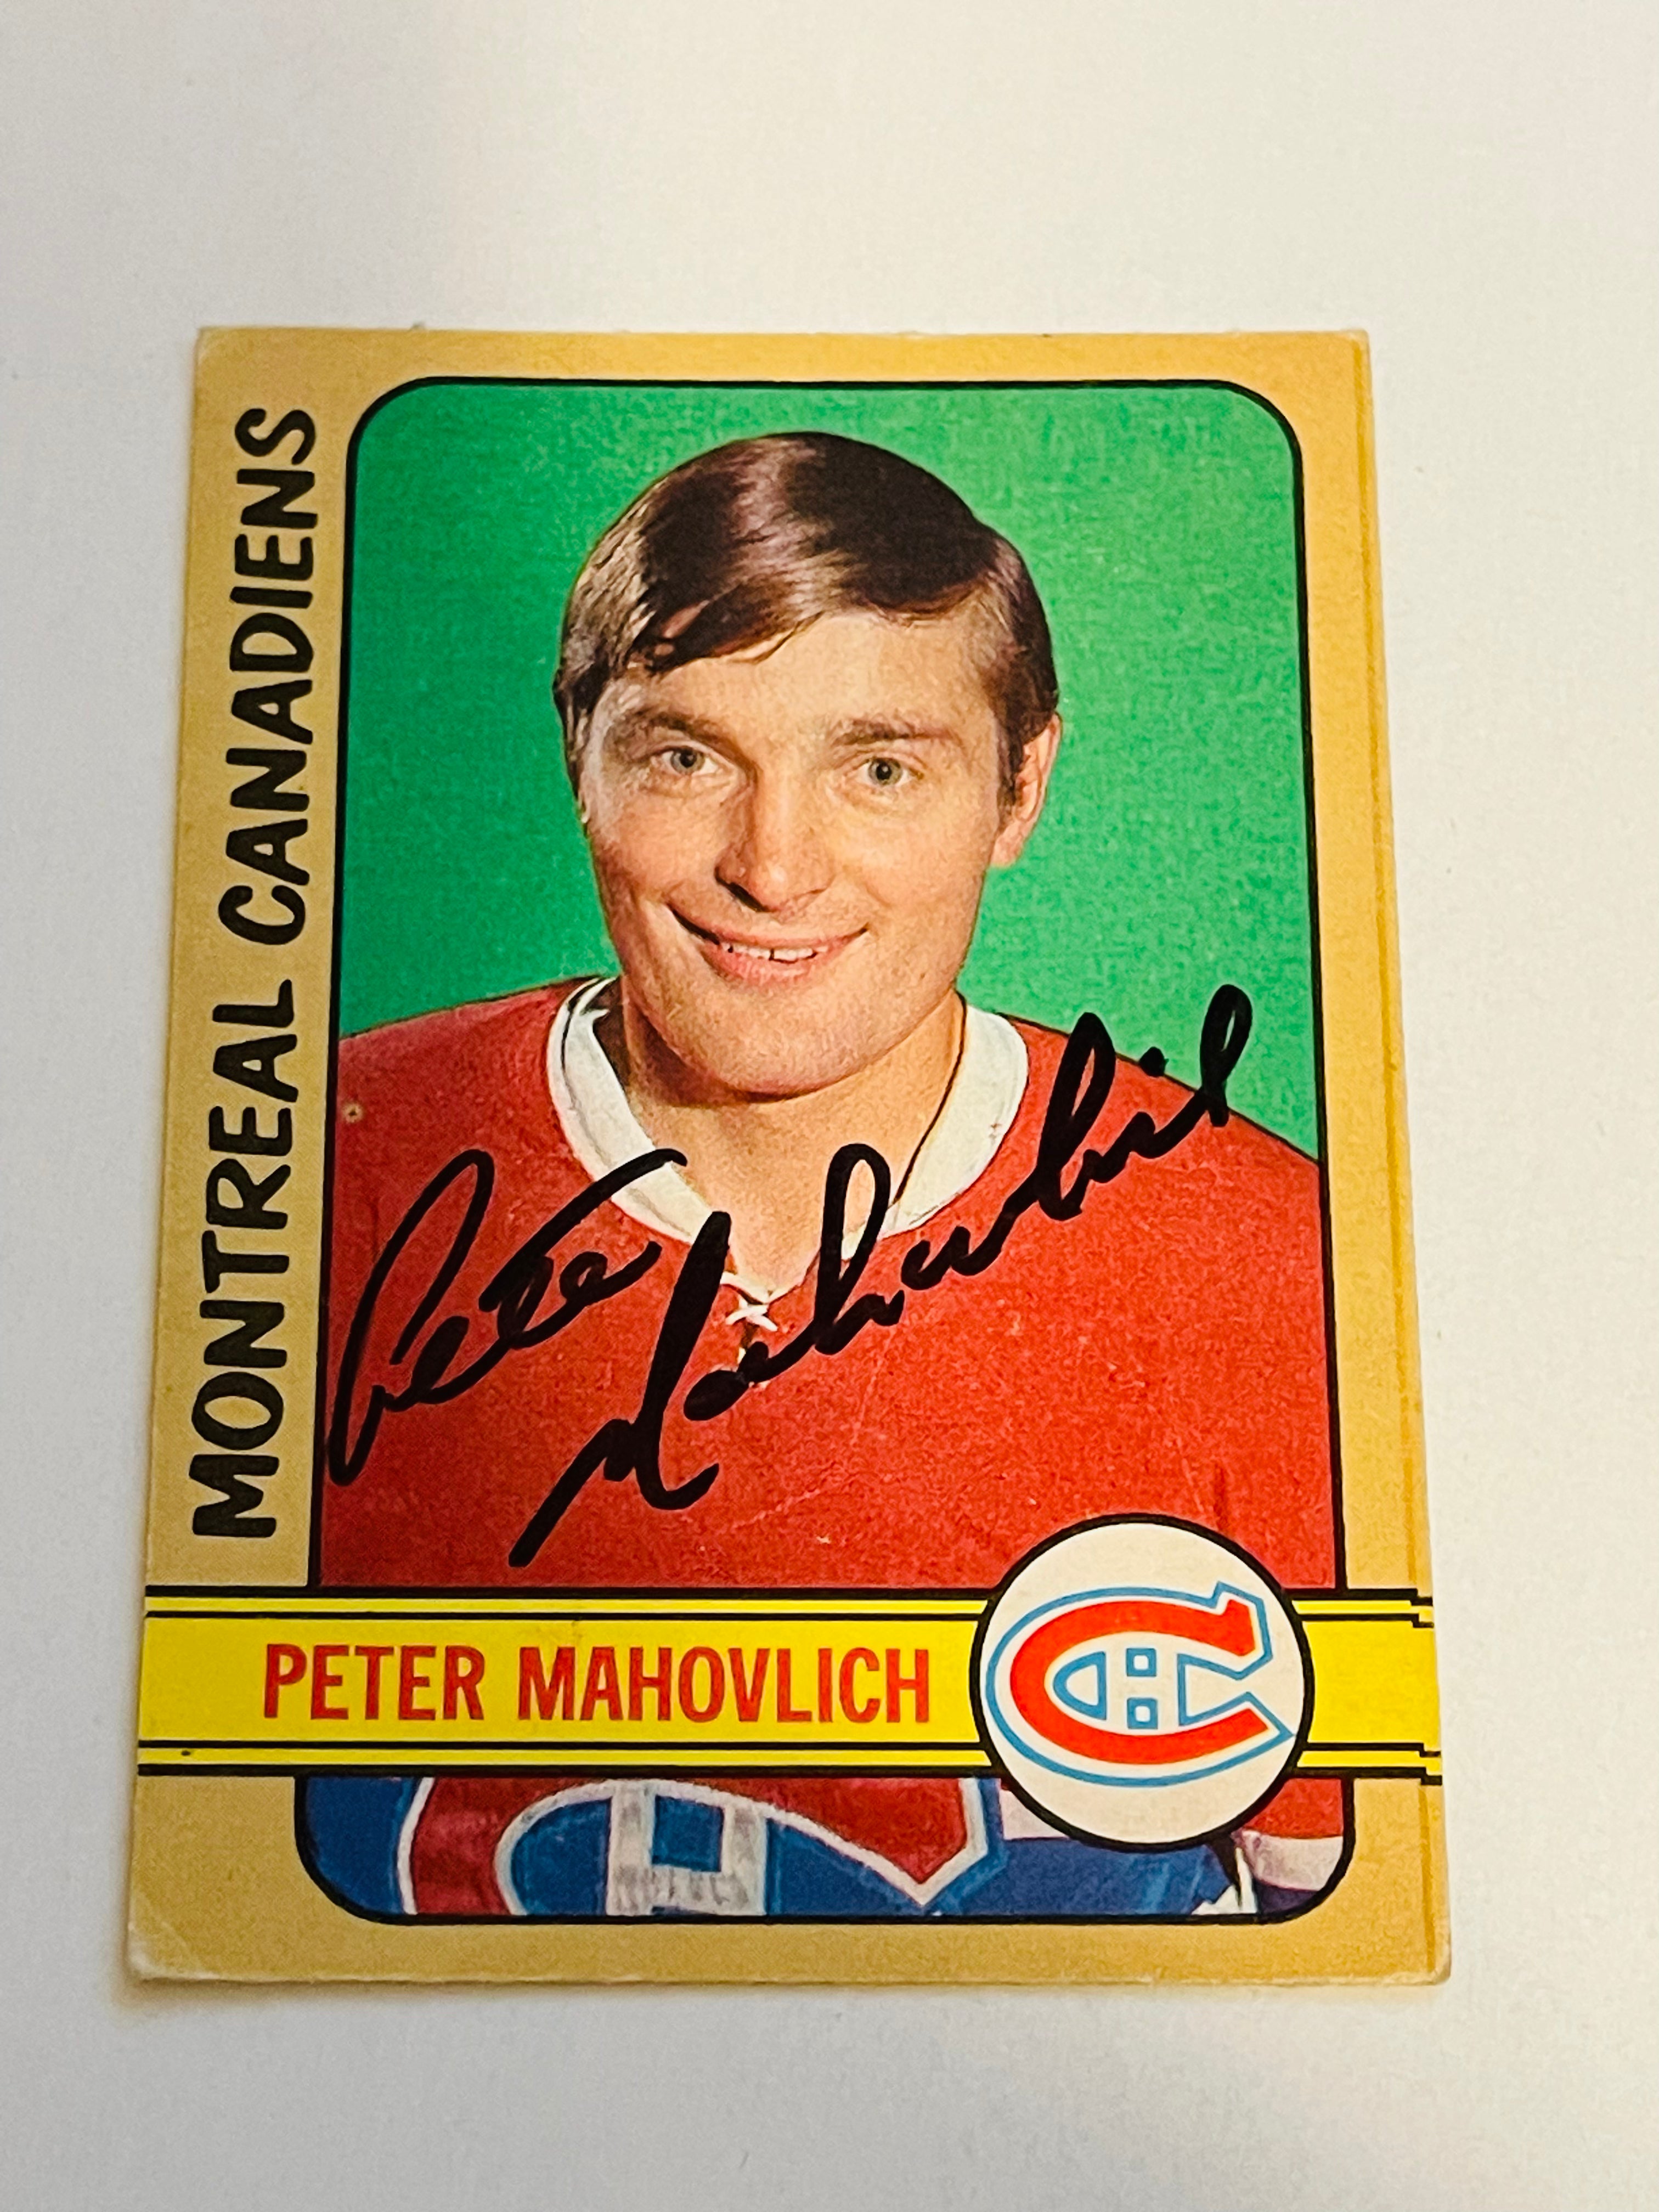 Pete Mahovlich autographed Montreal Canadiens hockey card with COA